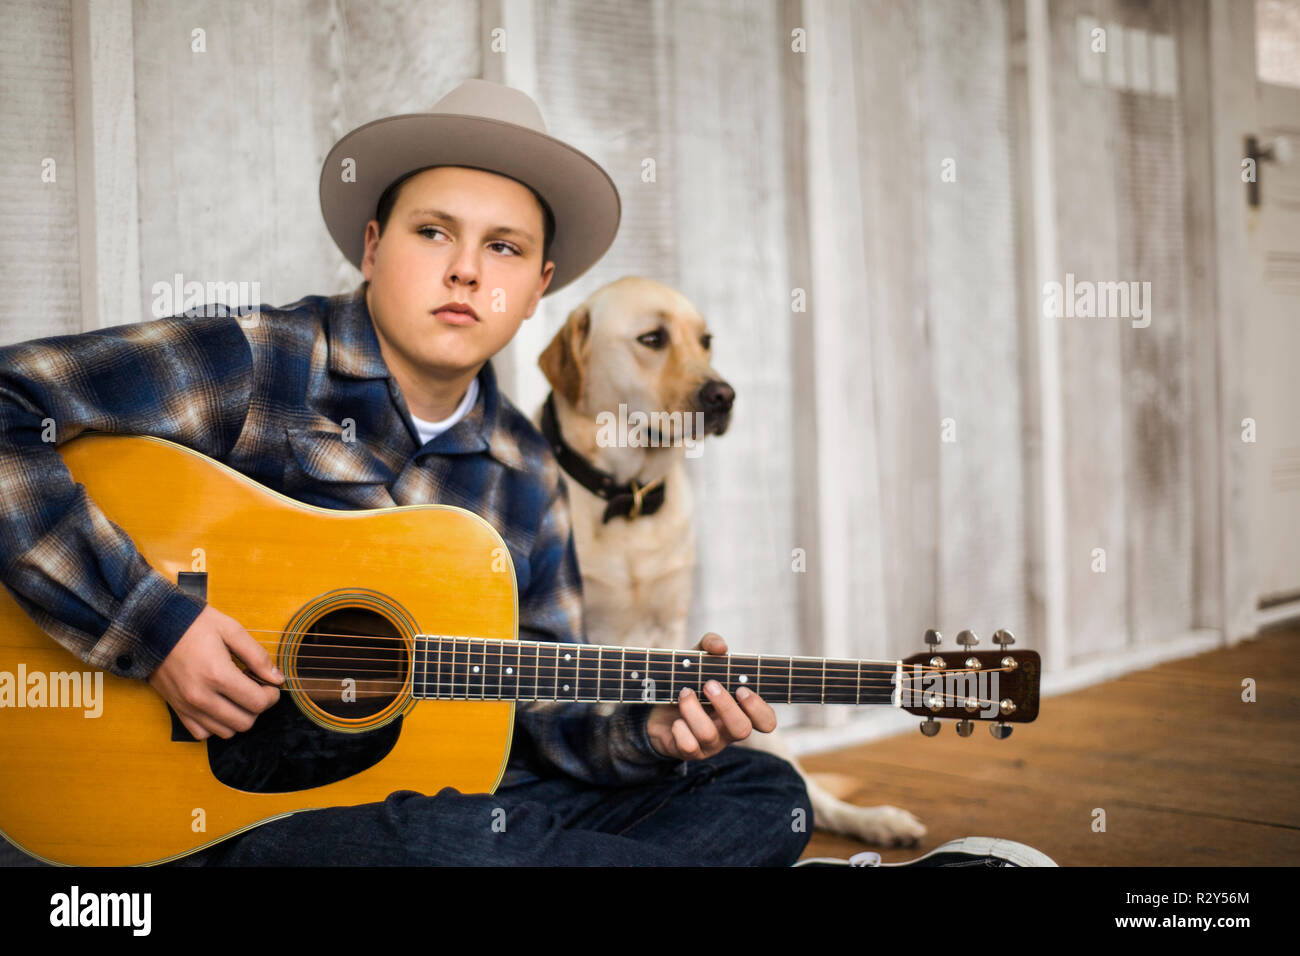 Teenage boy playing an acoustic guitar with his dog. Stock Photo